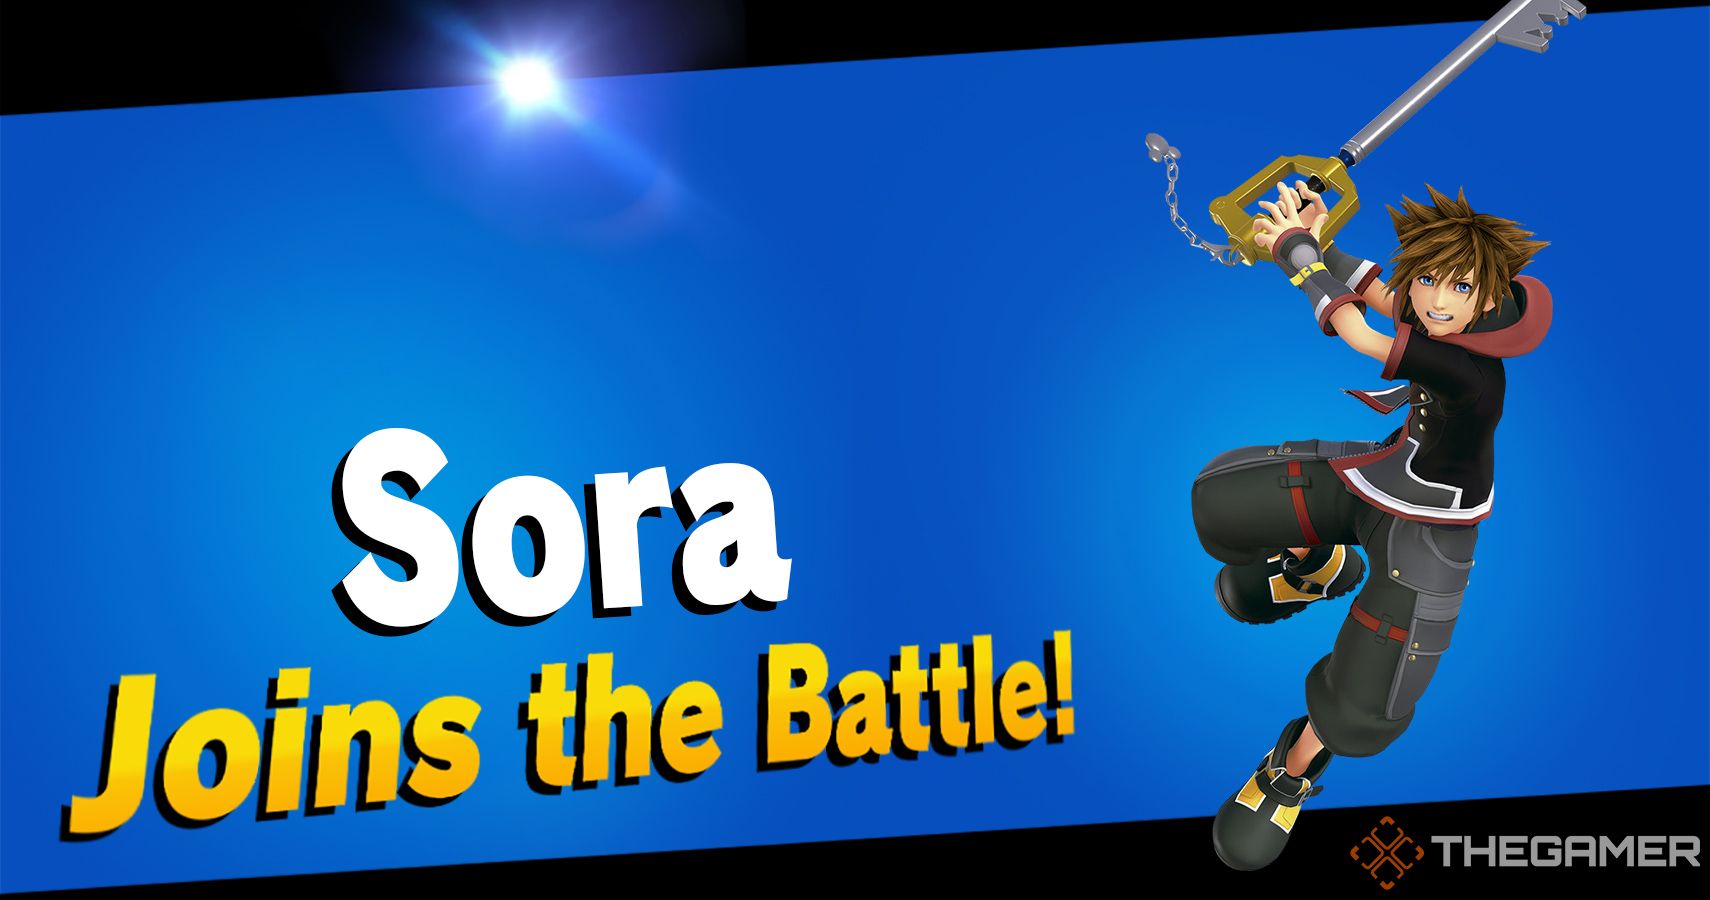 This is what the “anime sword fighter” is : r/SmashBrosUltimate